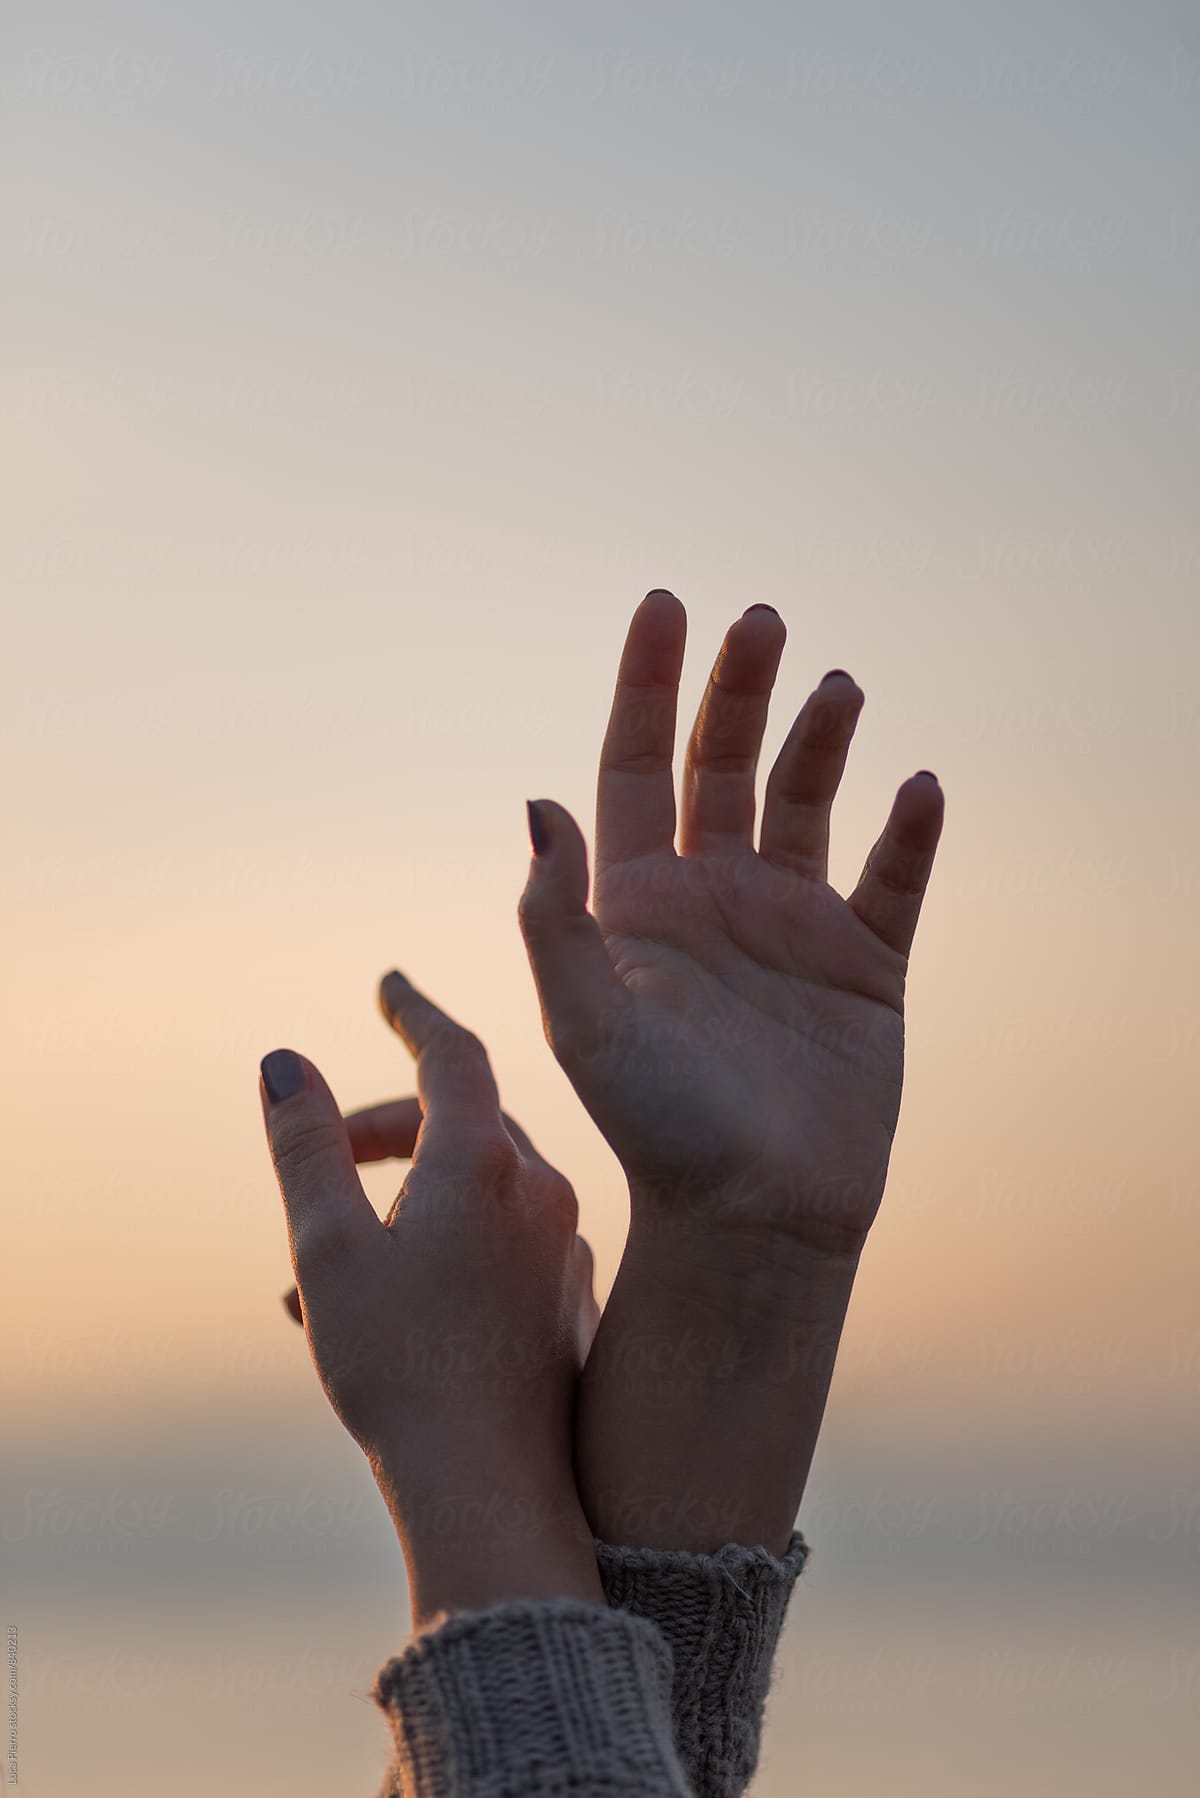 Famale hands raised against the sky at sunset